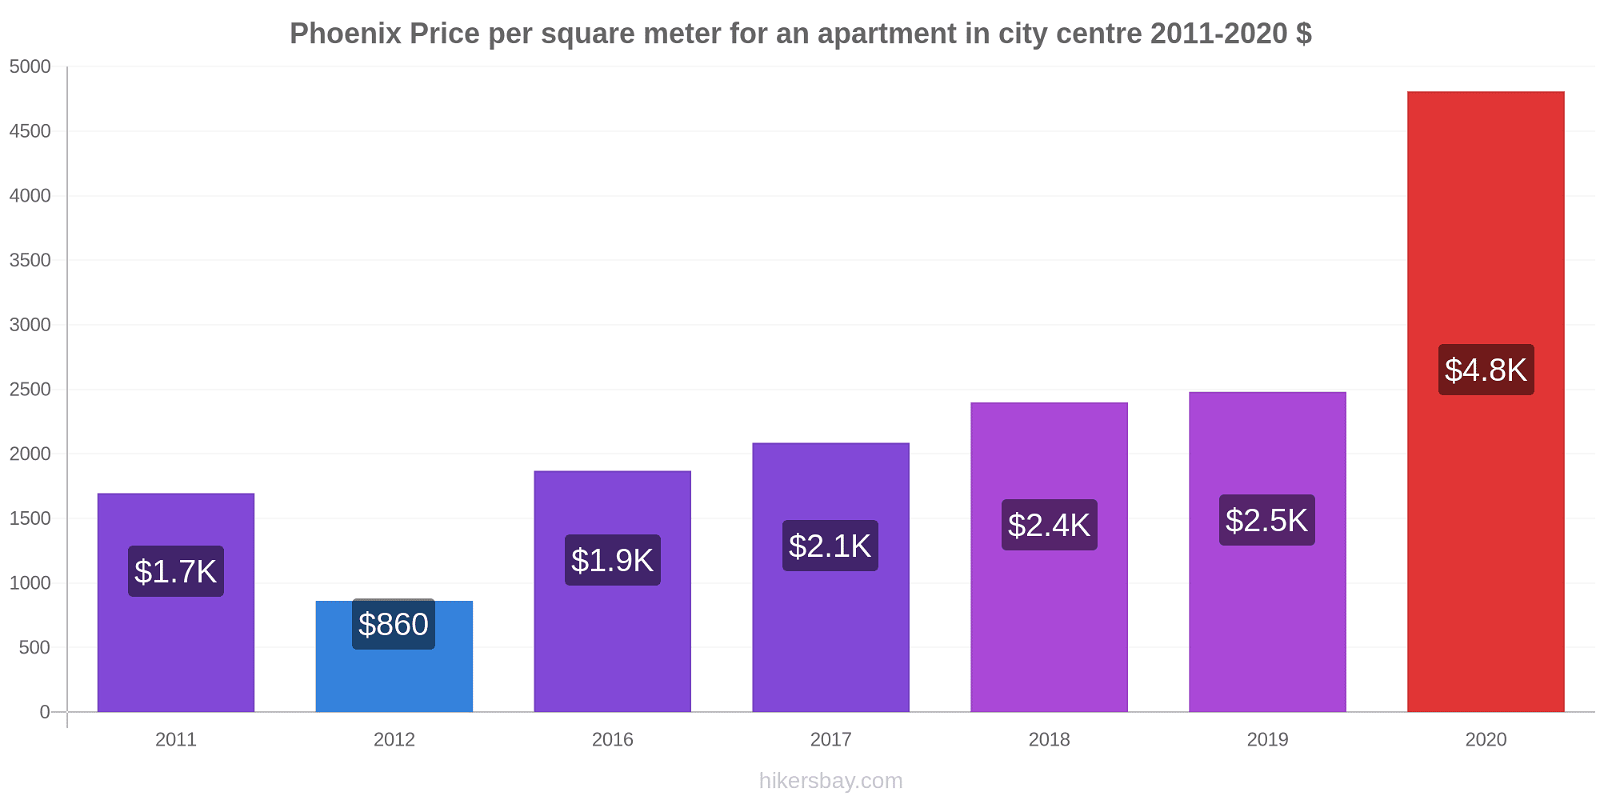 Phoenix price changes Price per square meter for an apartment in city centre hikersbay.com